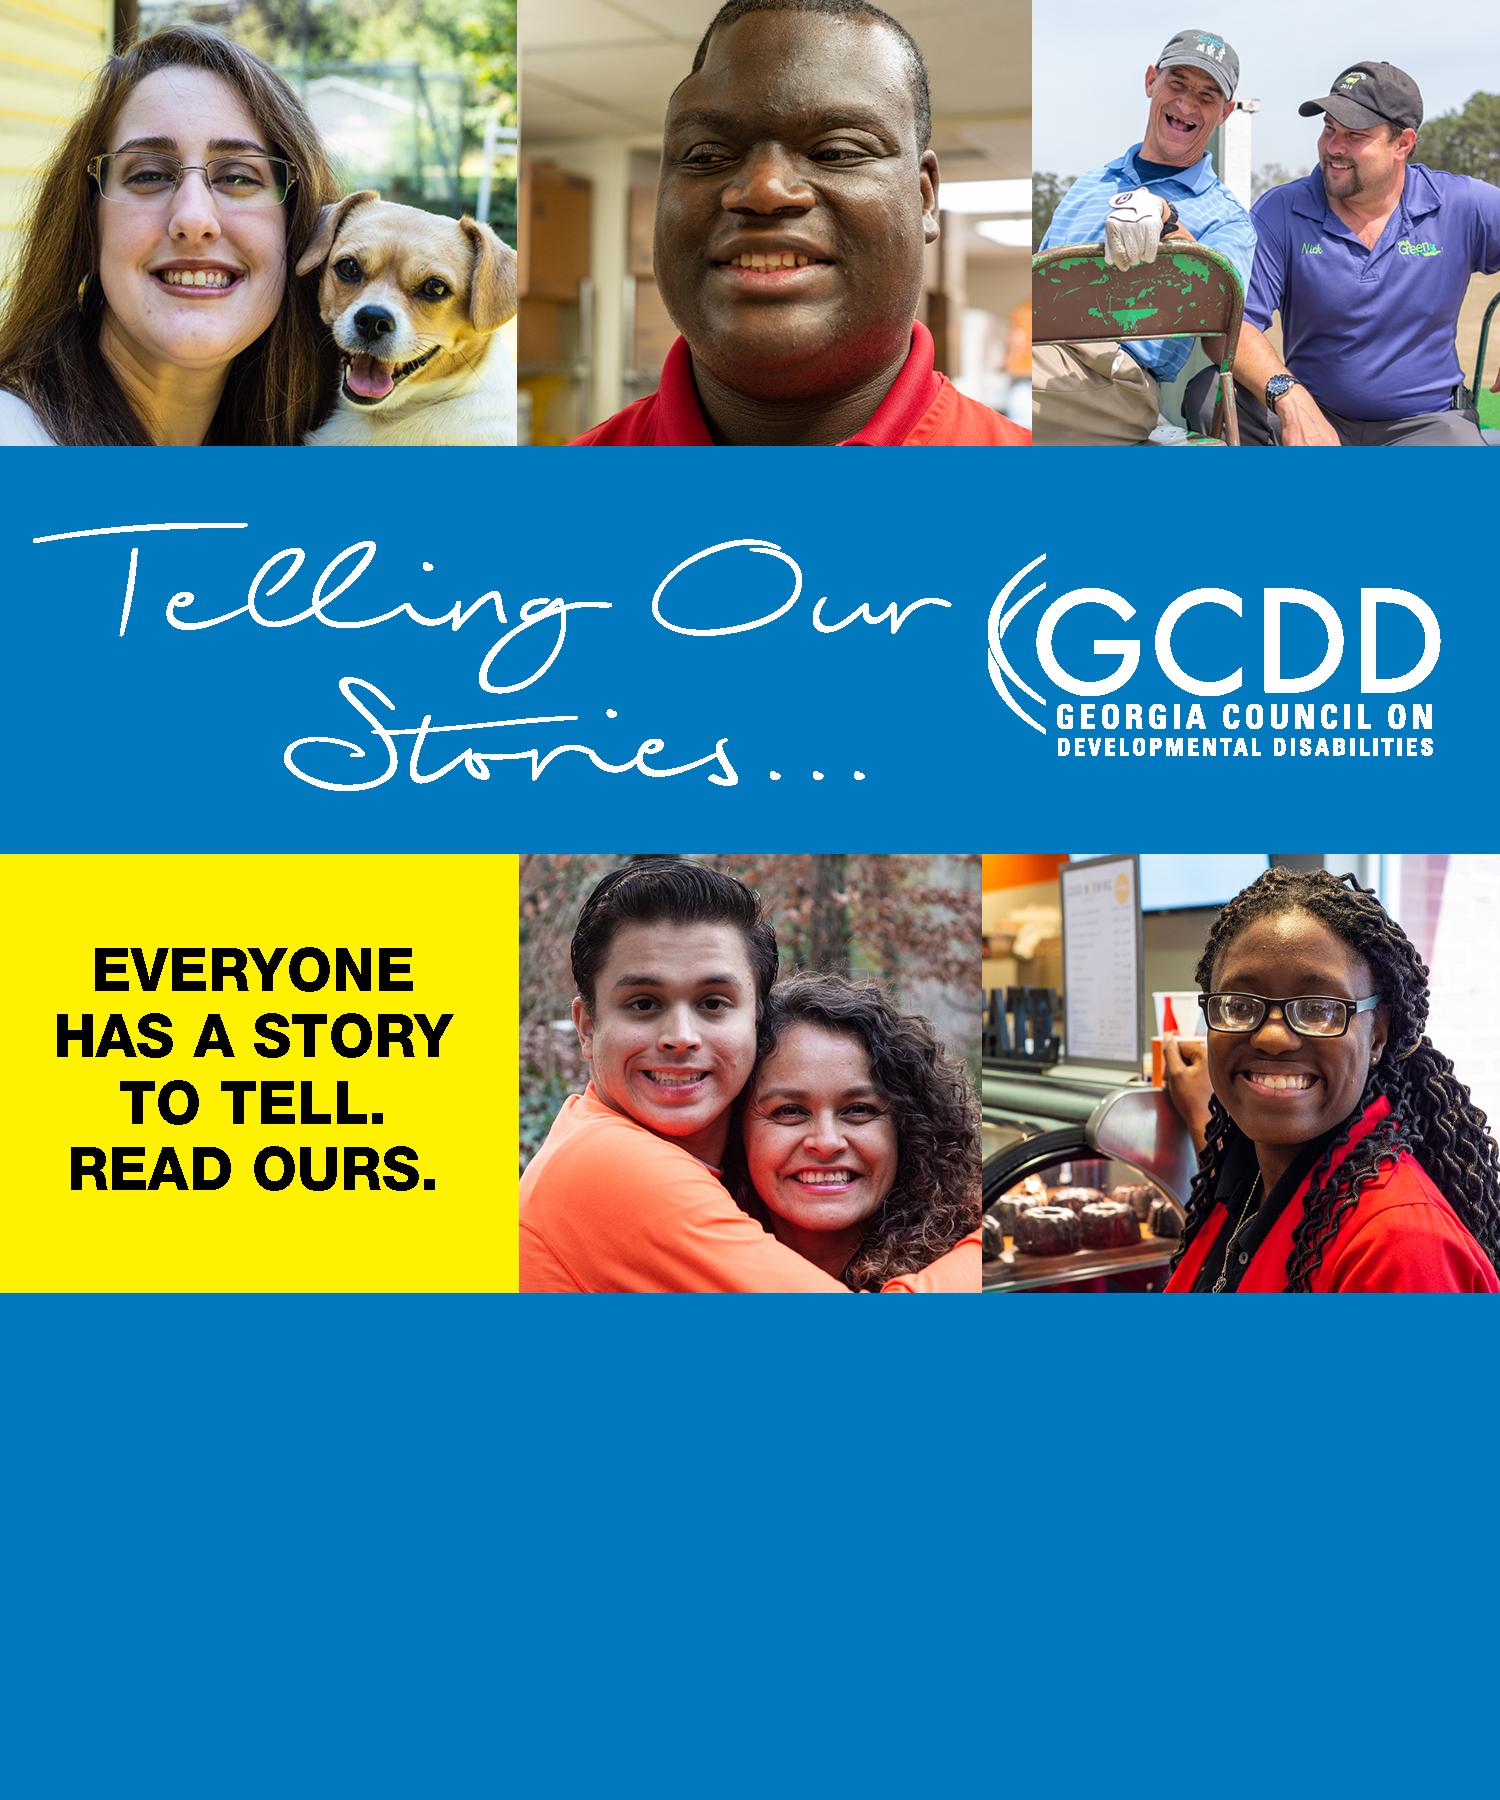 Launched in the summer of 2019, GCDD’s Storytelling Project paints a picture of the complex systems of support that enable people with developmental disabilities to live their best lives. Spanning Georgia’s 56 state senate districts, this advocacy project features over 60 stories and an interactive map that shows the reach of the project. Read our stories.